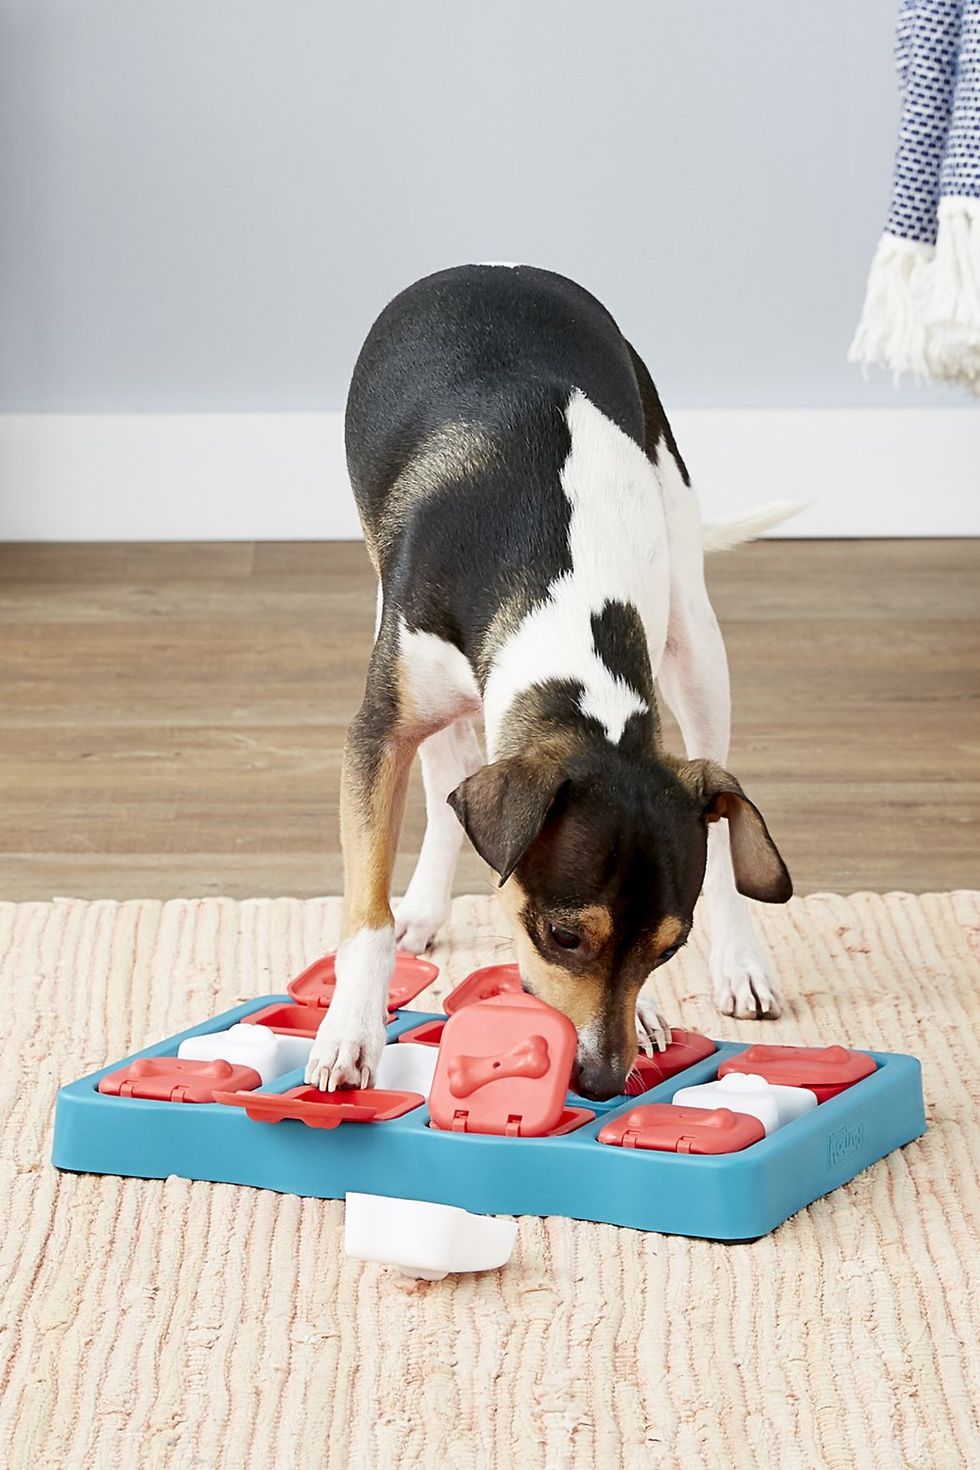 Choosing the Best Interactive Dog Toys & Food Puzzles